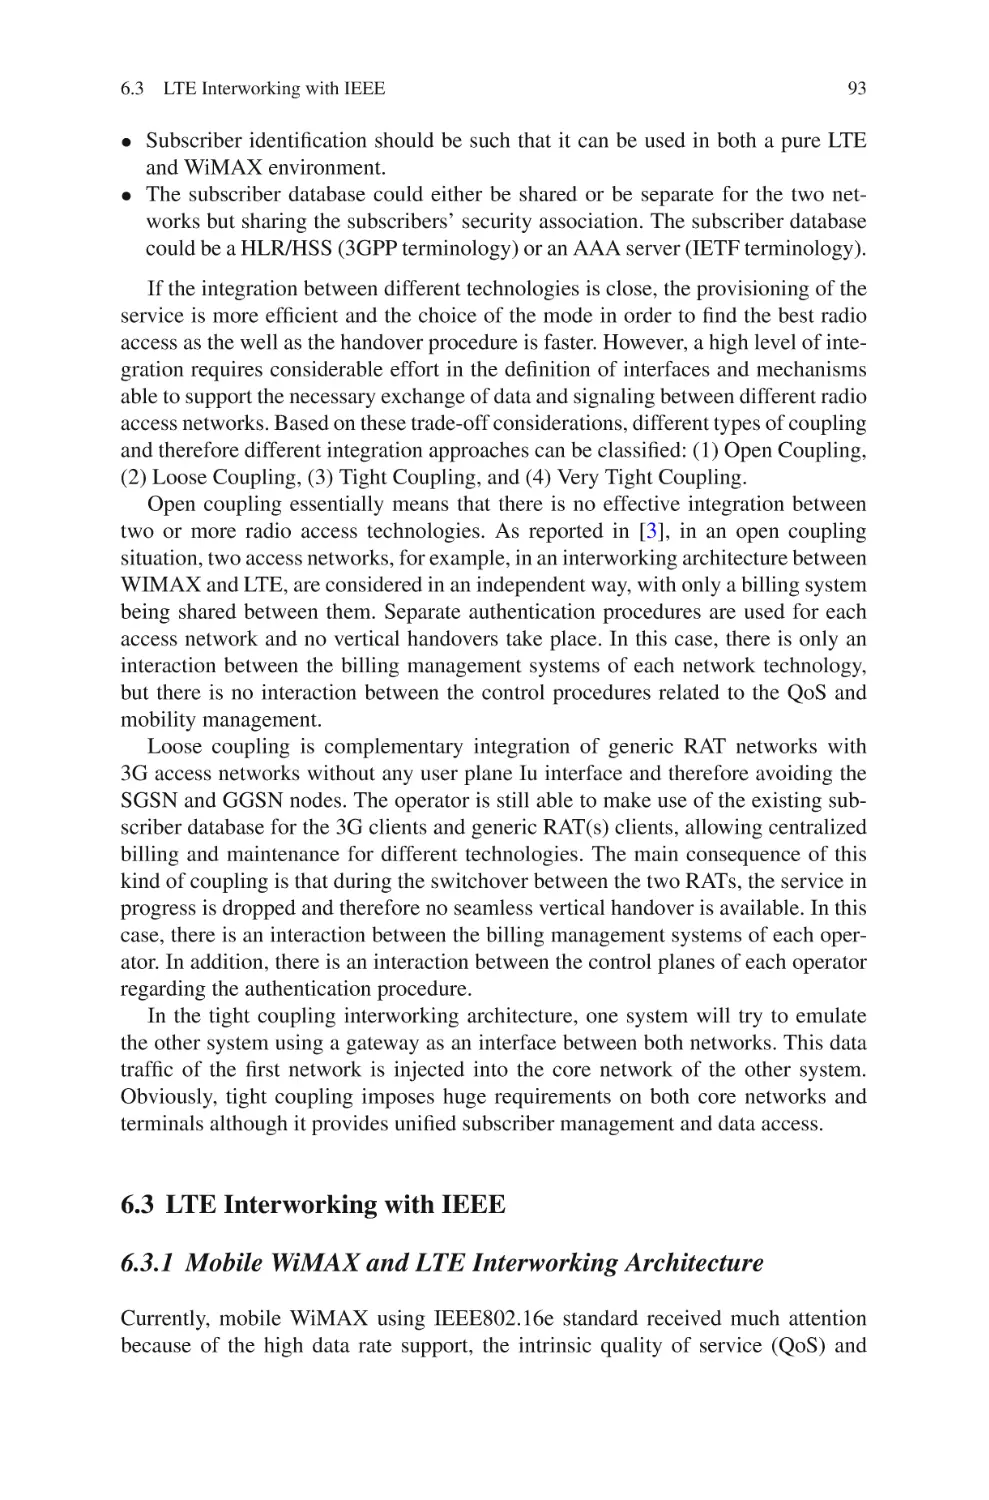 6.3  LTE Interworking with IEEE
6.3.1  Mobile WiMAX and LTE Interworking Architecture